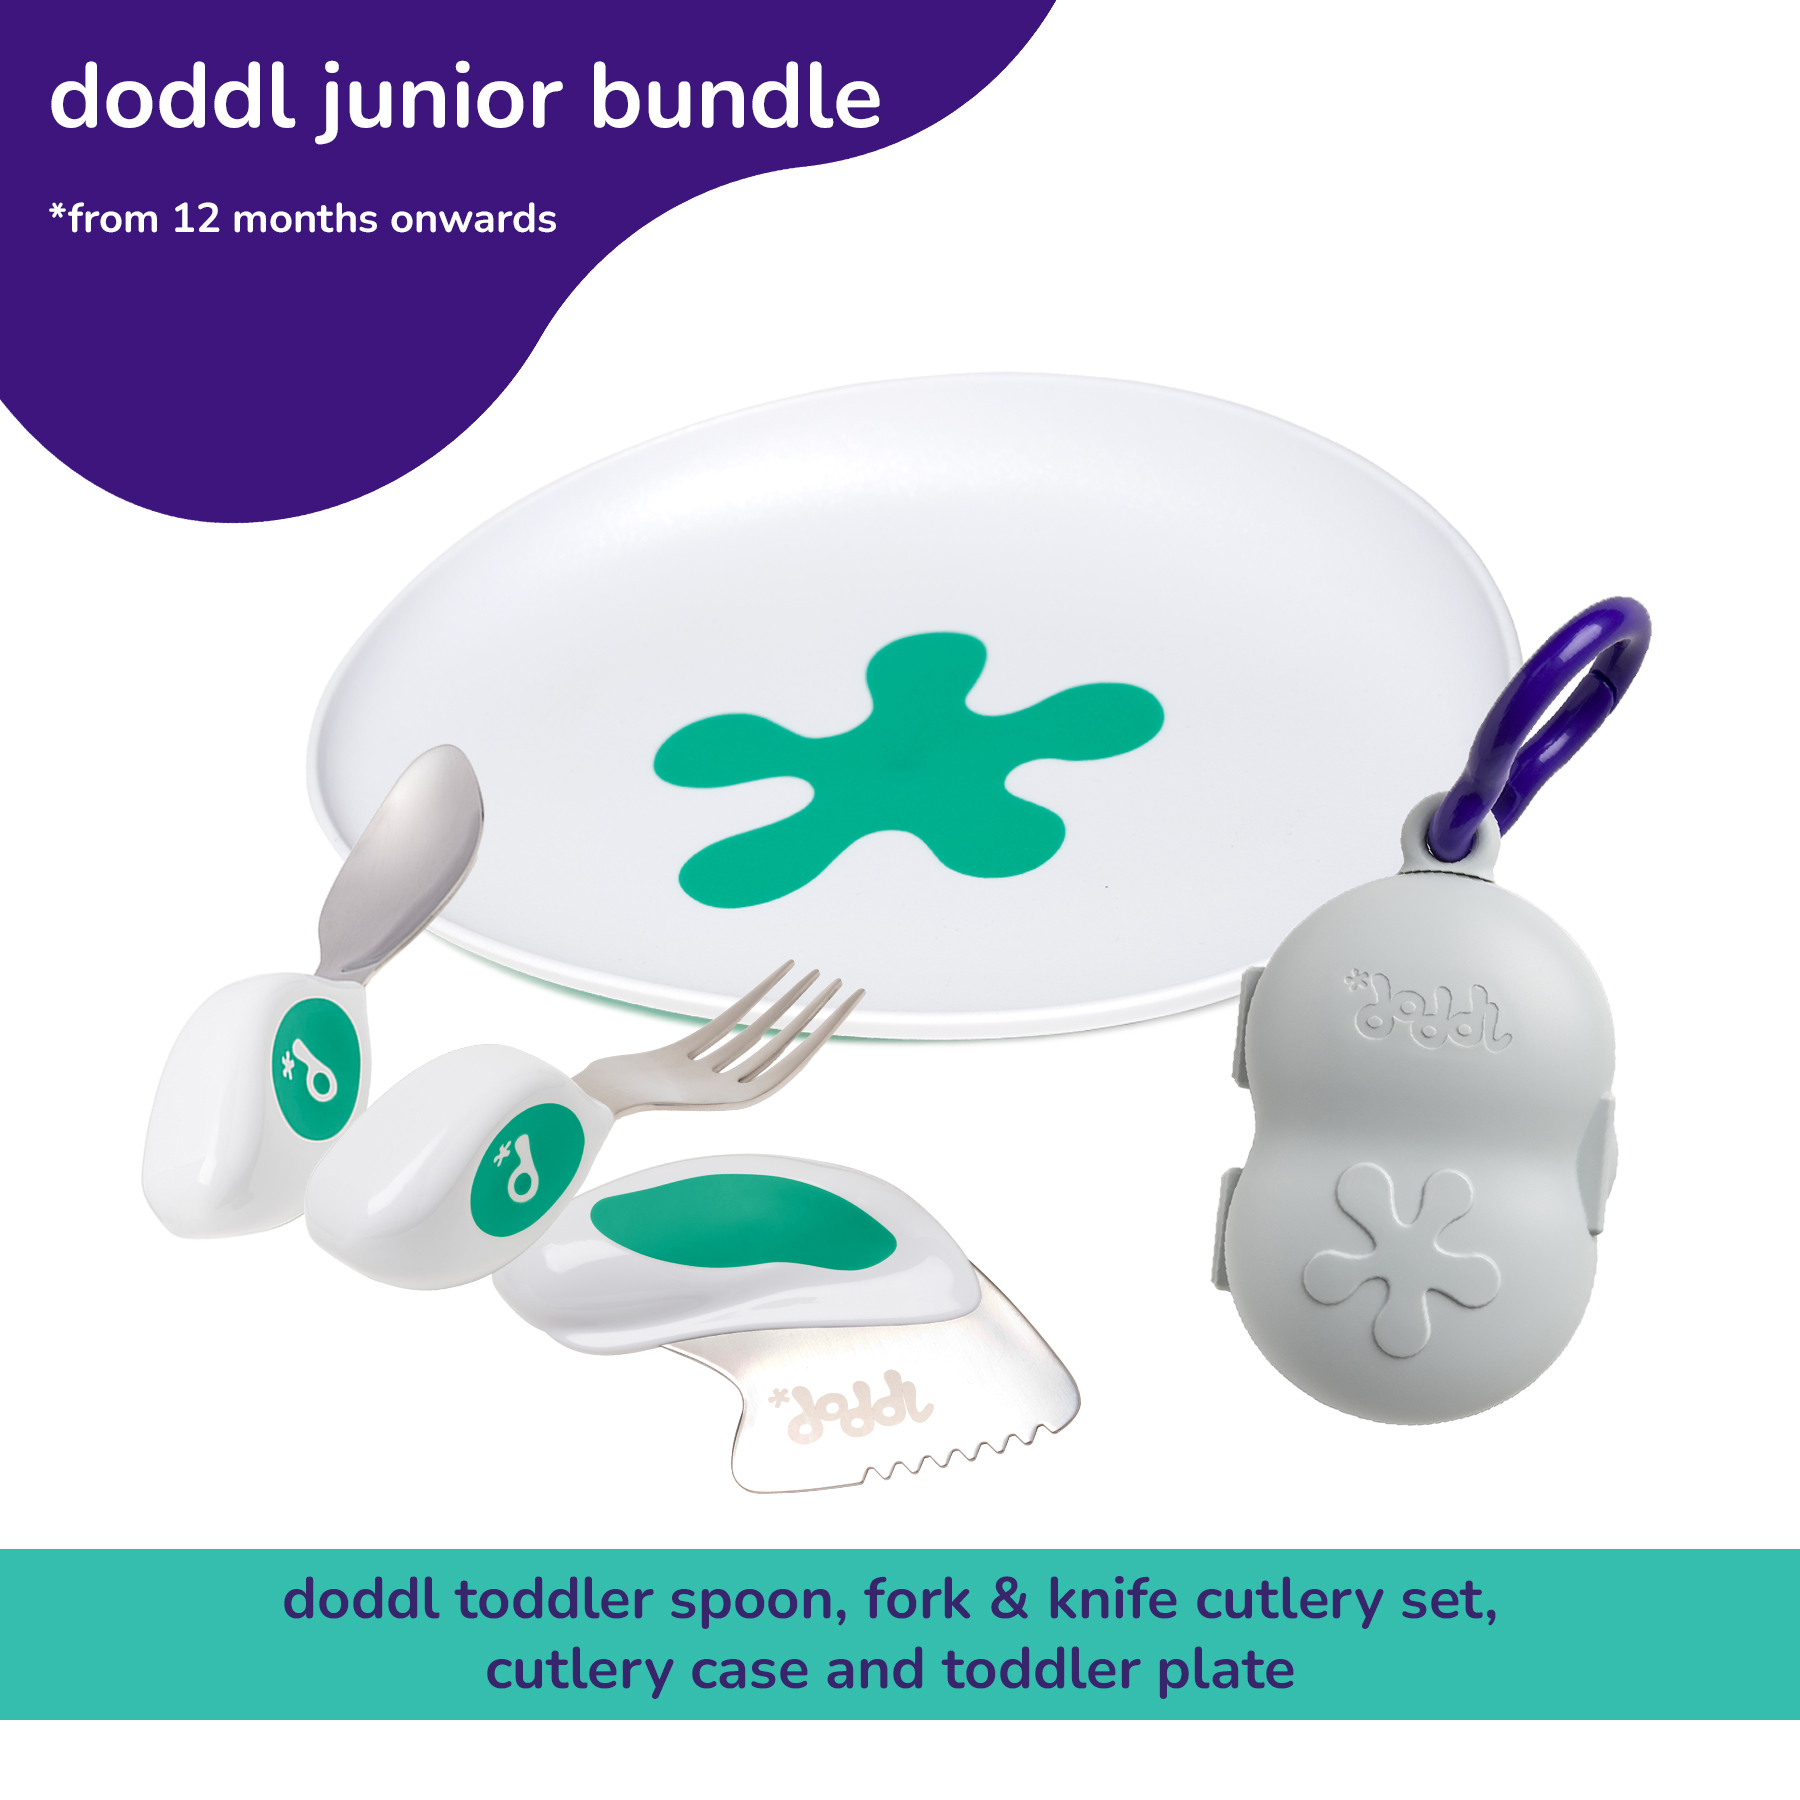 Doddl Junior Bundle: Toddler Spoon, Fork & Knife, Cutlery Case with Plate